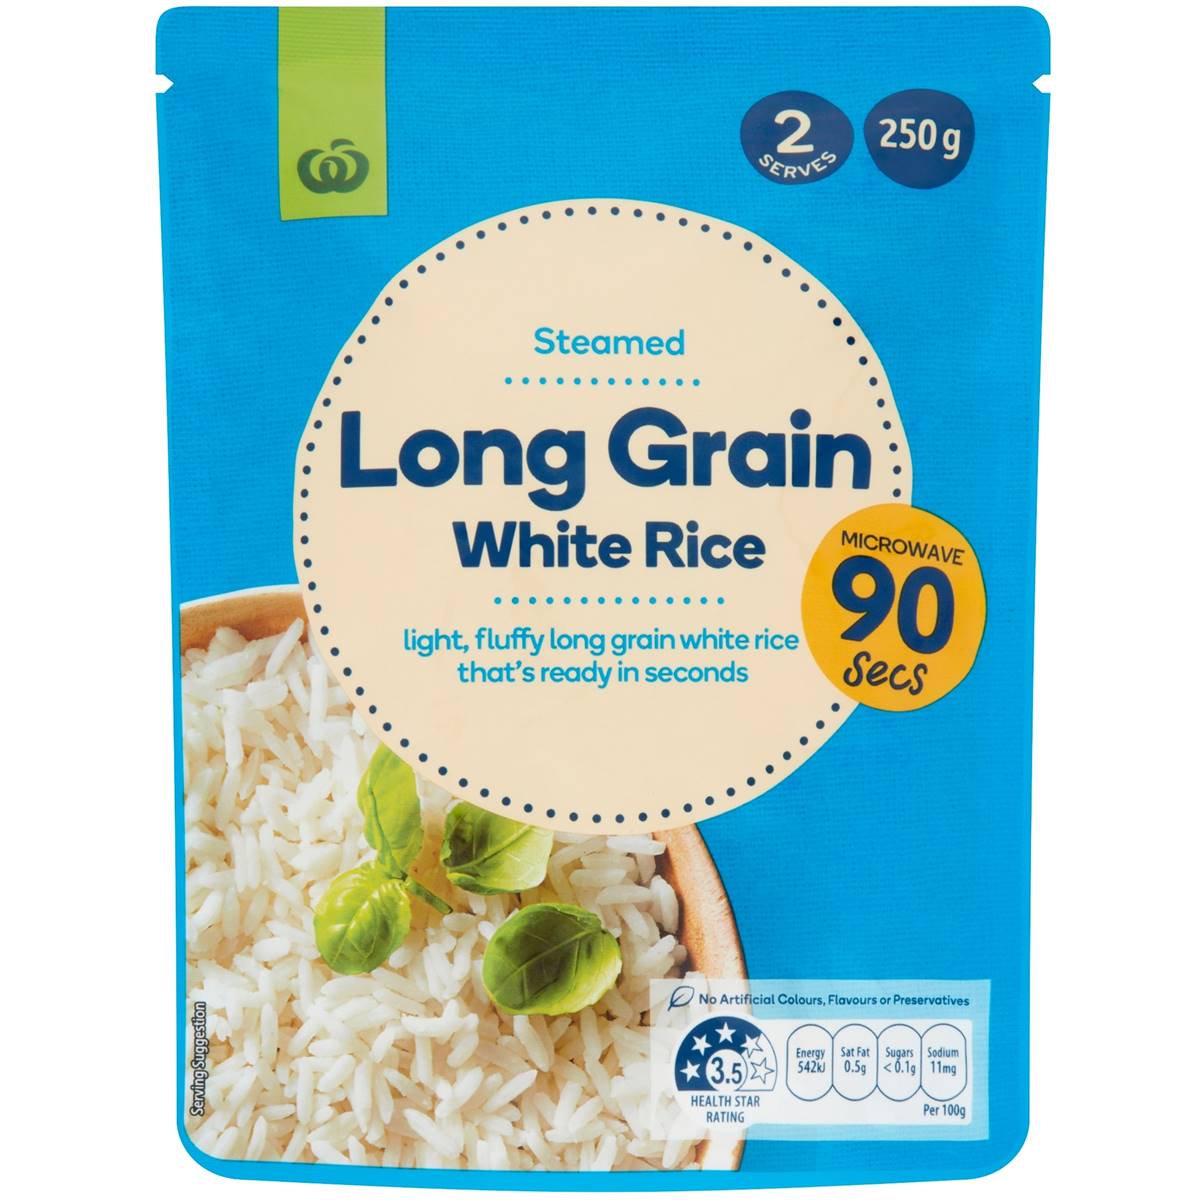 Calories in Woolworths Microwave Long Grain White Rice